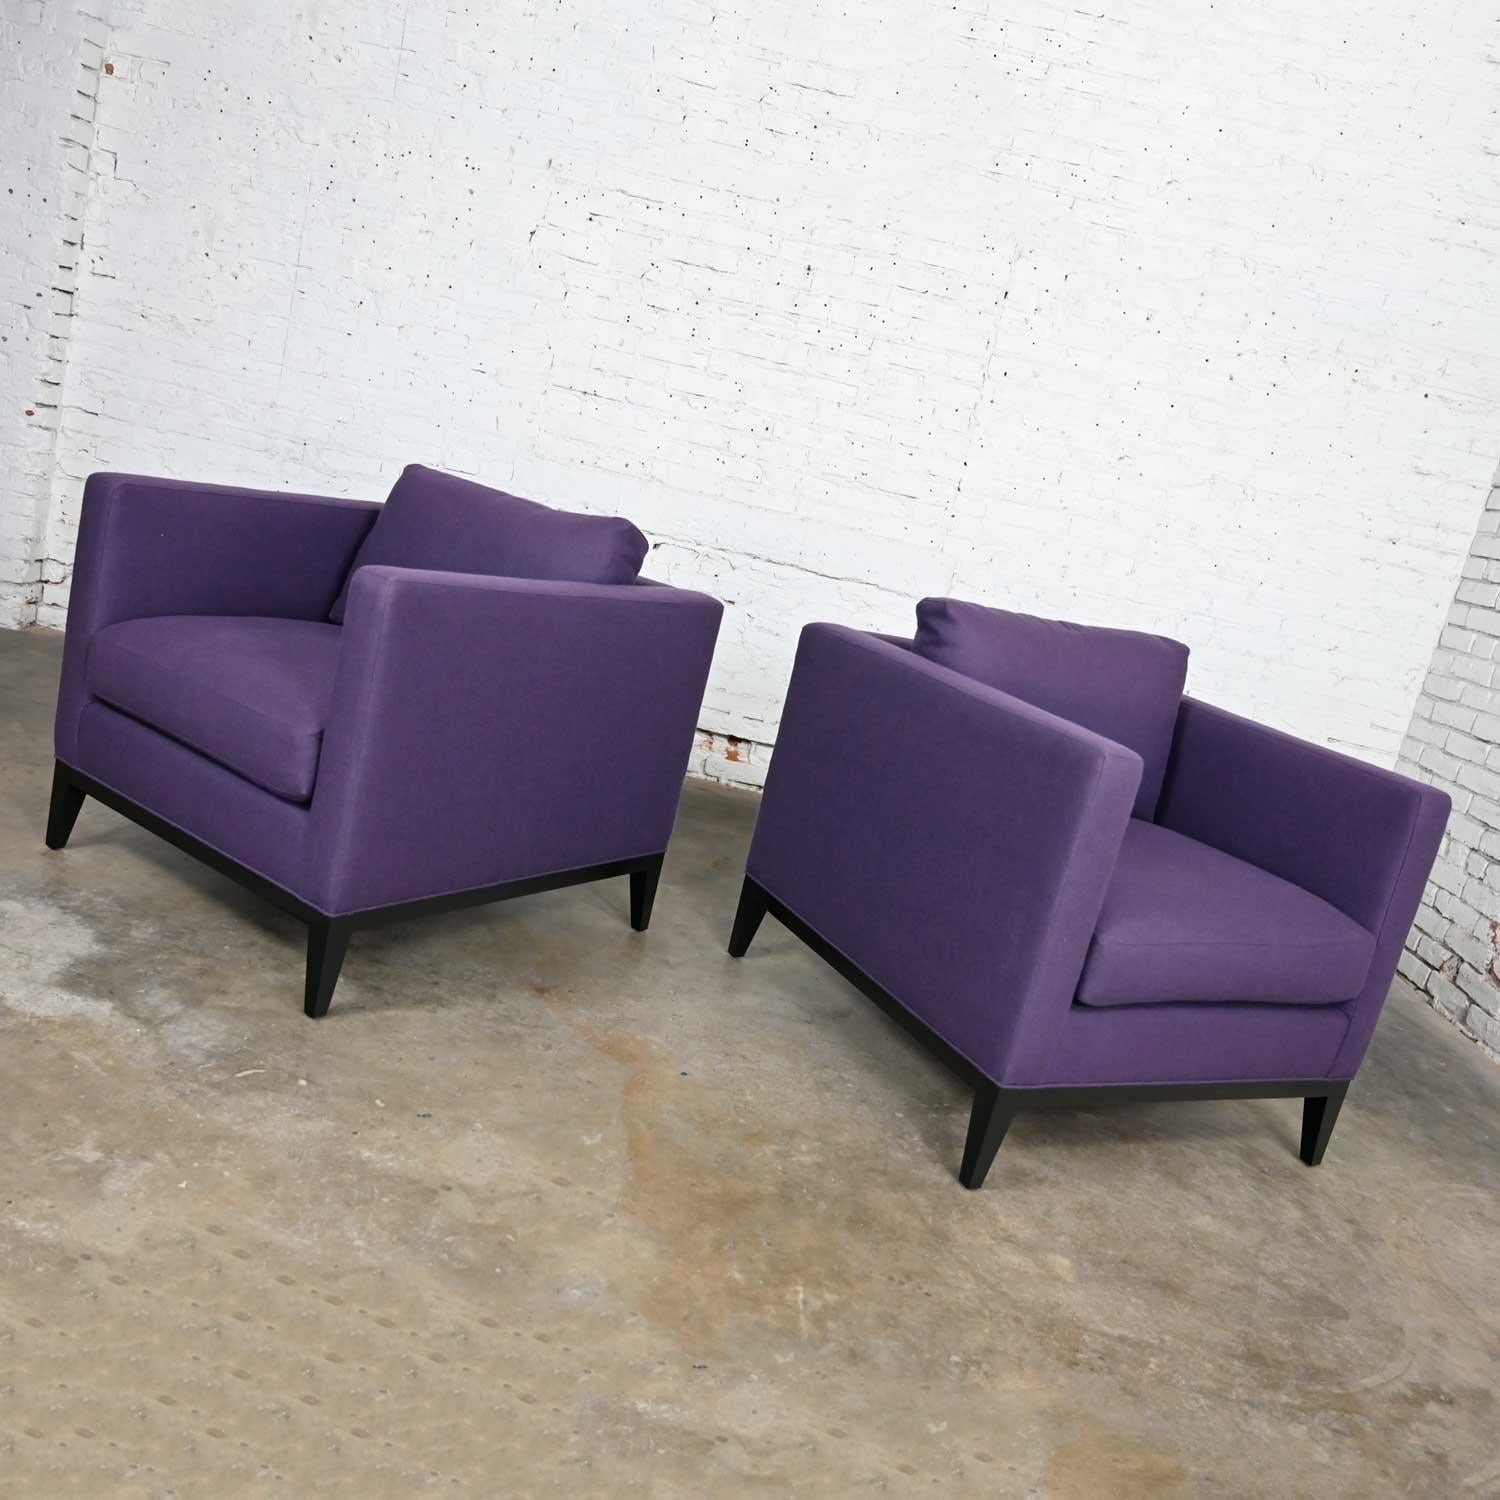 Modern Purple Plum Tone Tuxedo Style Club Chairs by Baker a Pair In Good Condition For Sale In Topeka, KS